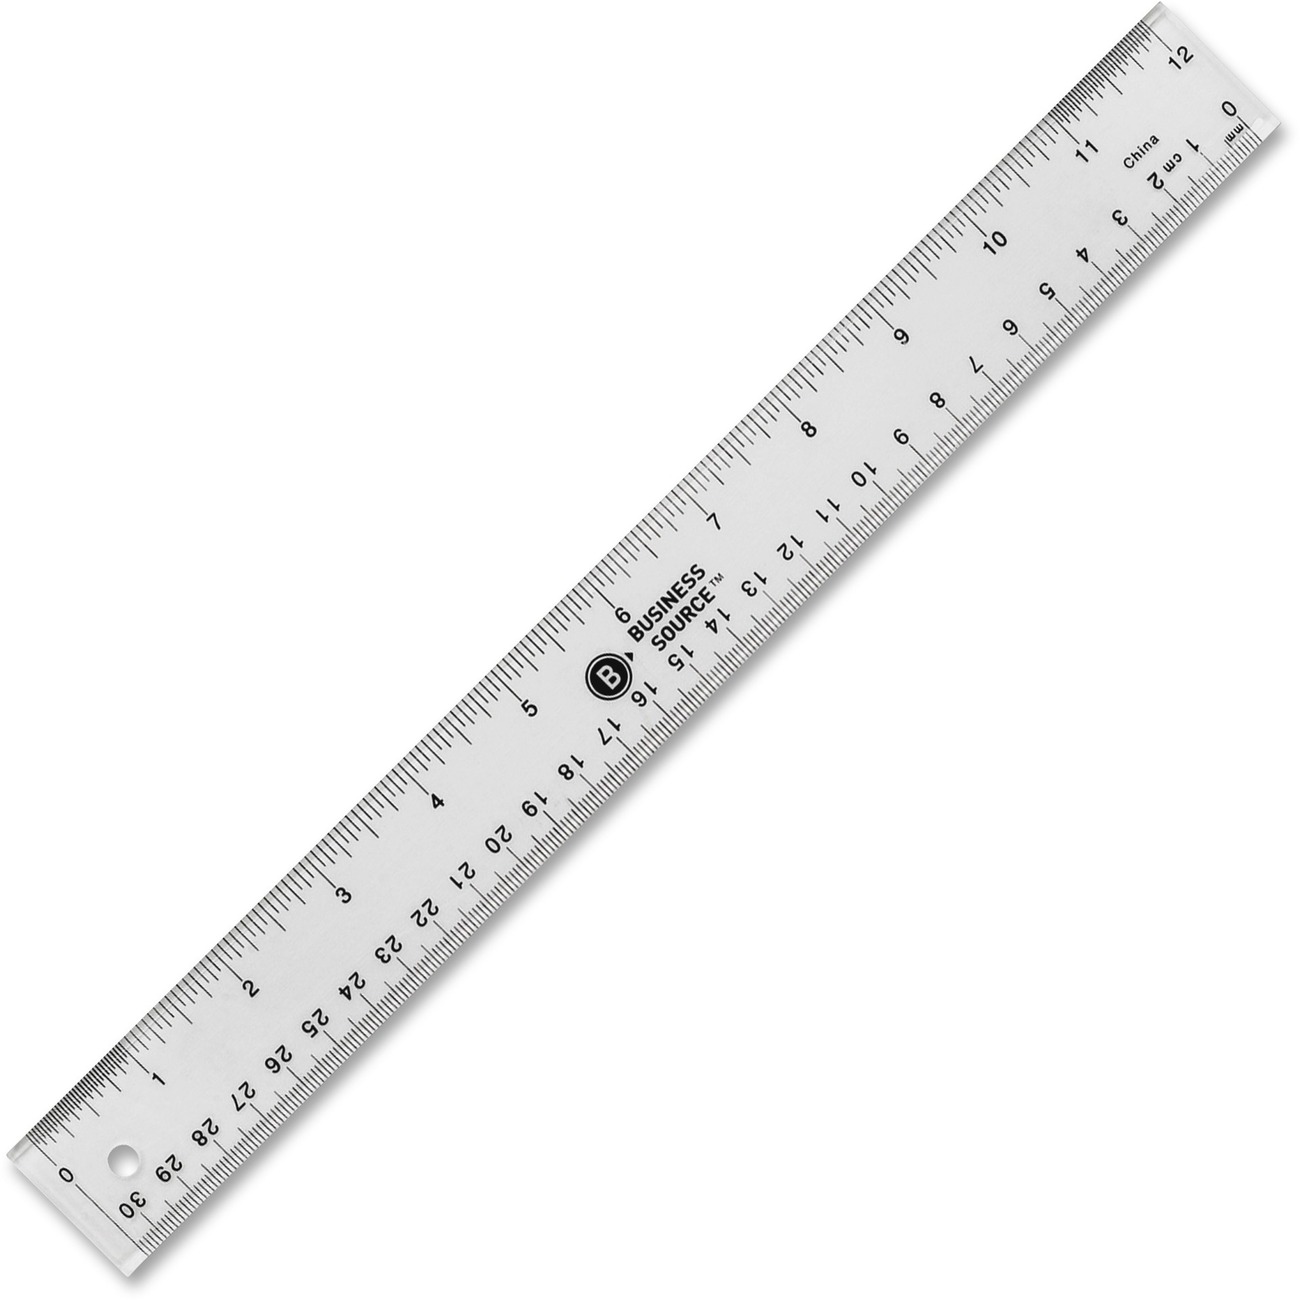 size to life ruler